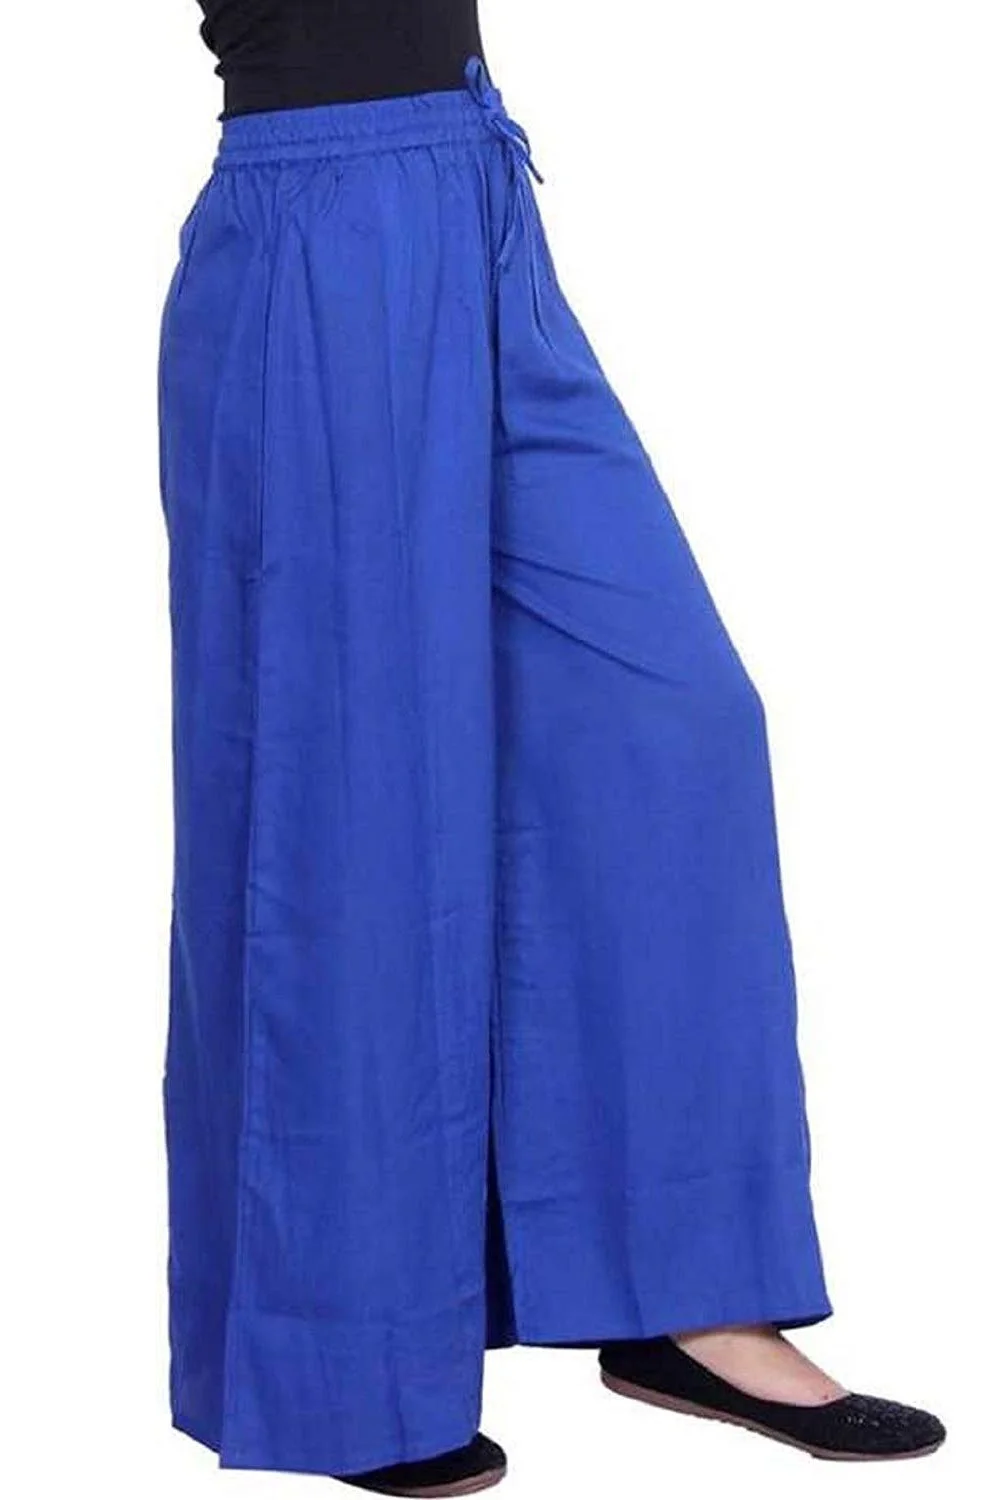 Forever Yours High Waist Pants In Royal Blue • Impressions Online Boutique